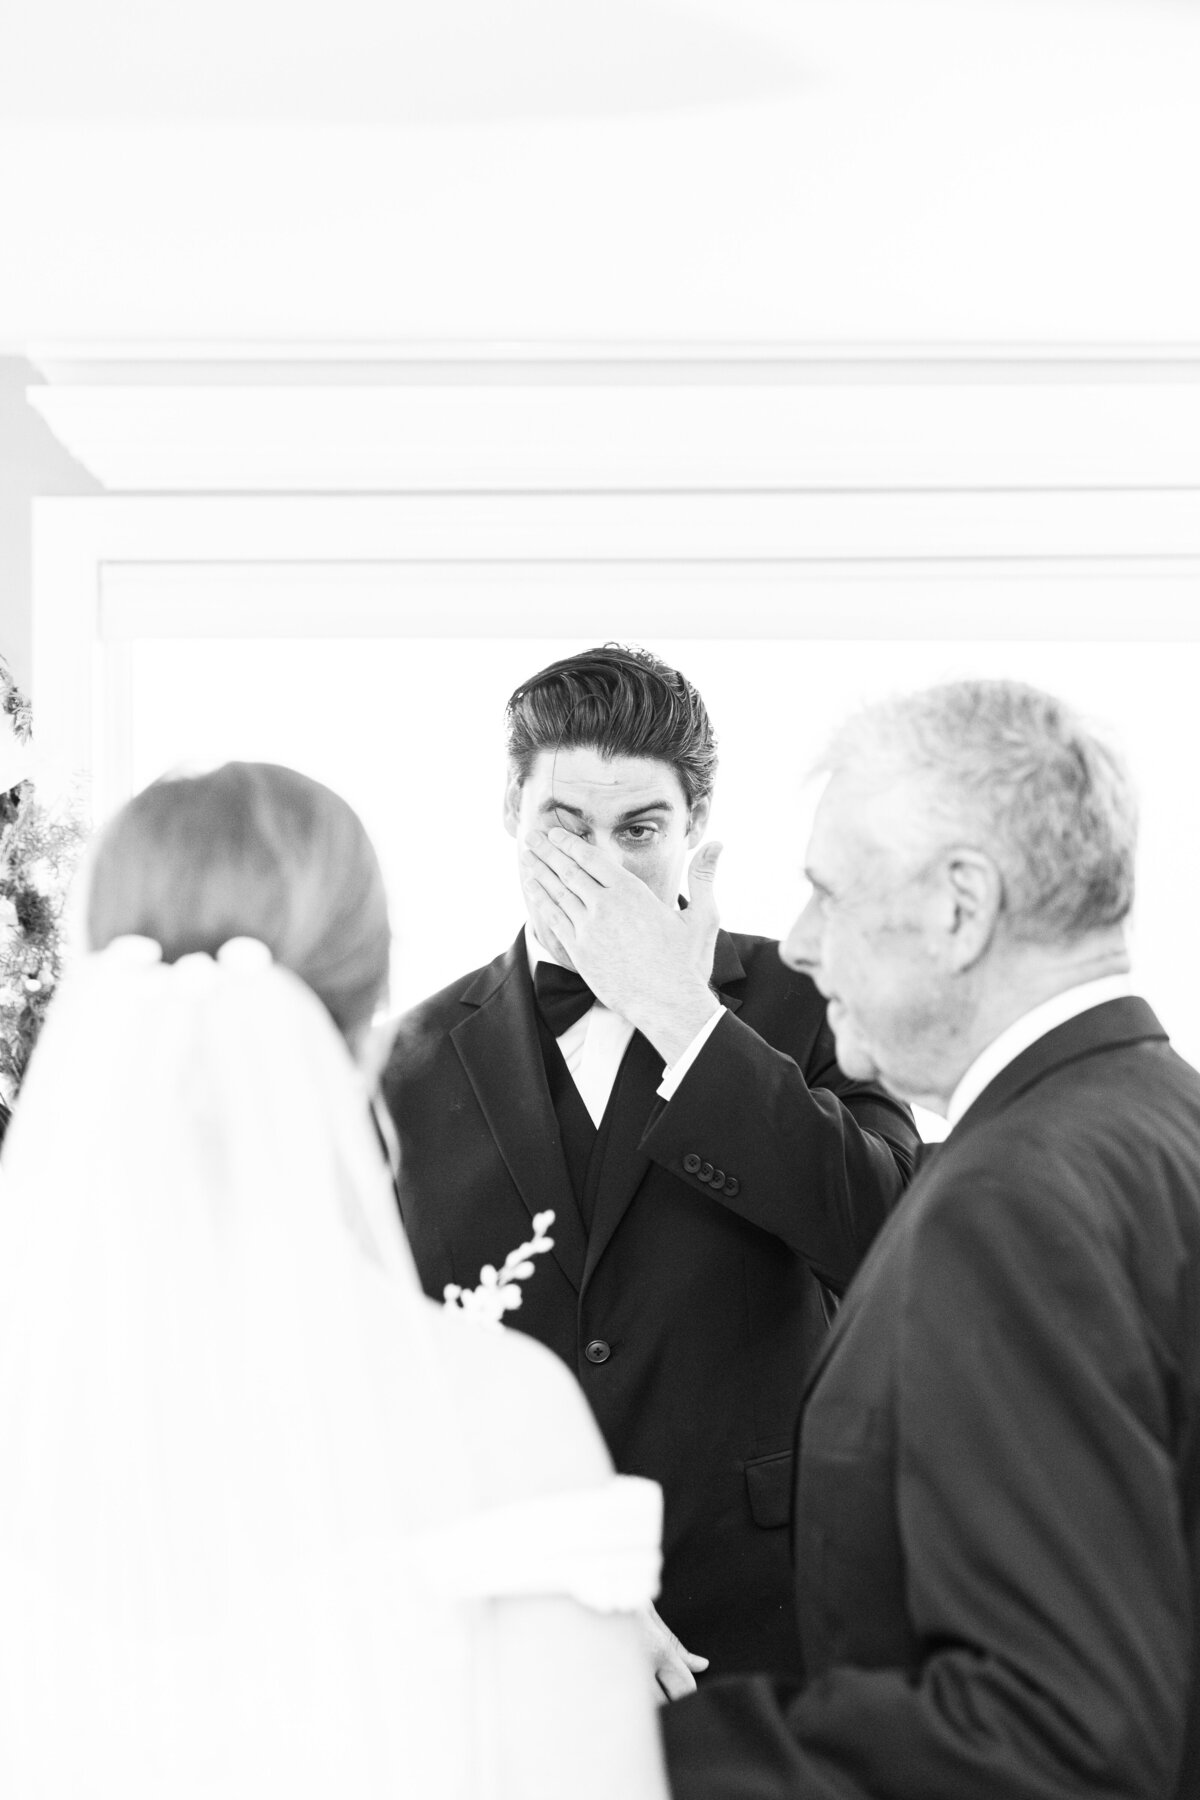 Groom wiping away a tear as his bride walks down the aisle representing candid Boston wedding moments